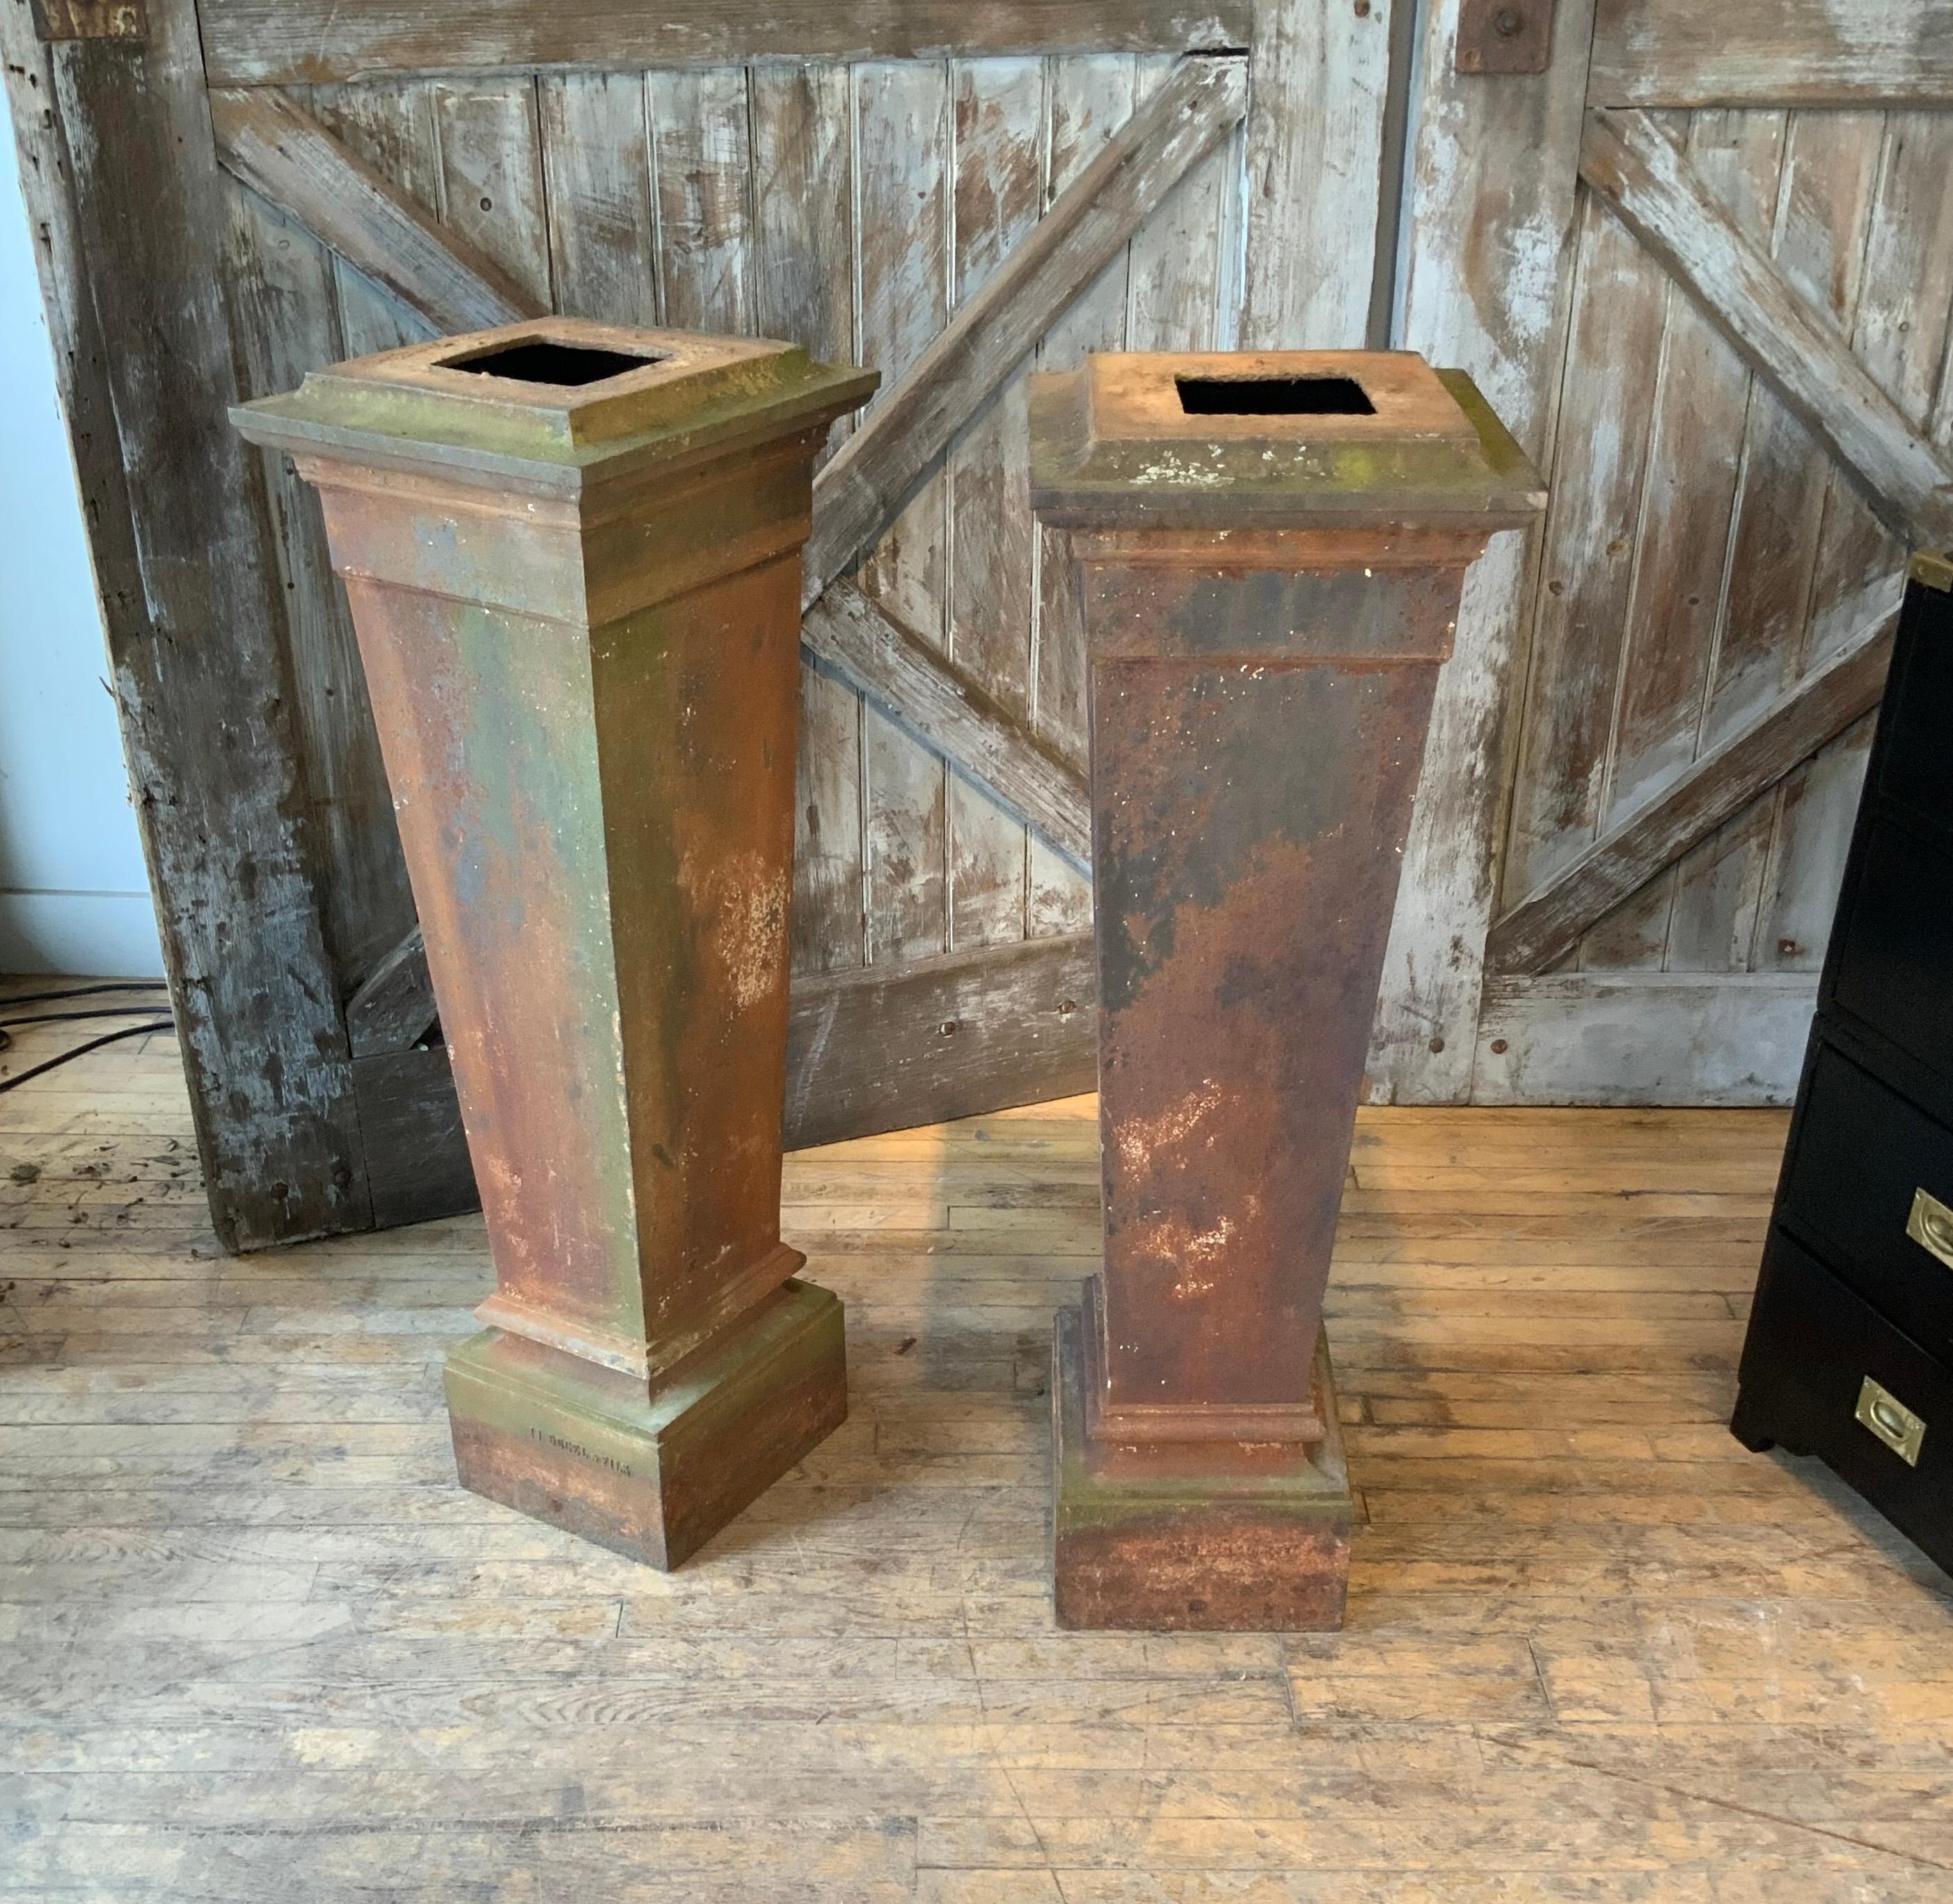 A very nice matched pair of 19th Century cast iron Pedestals by JJ Ducel et Fils. these french pedestals are tapered in form, with wide banded design bases and capitals. very heavy and well made. stamped JJ Ducel et Fils.